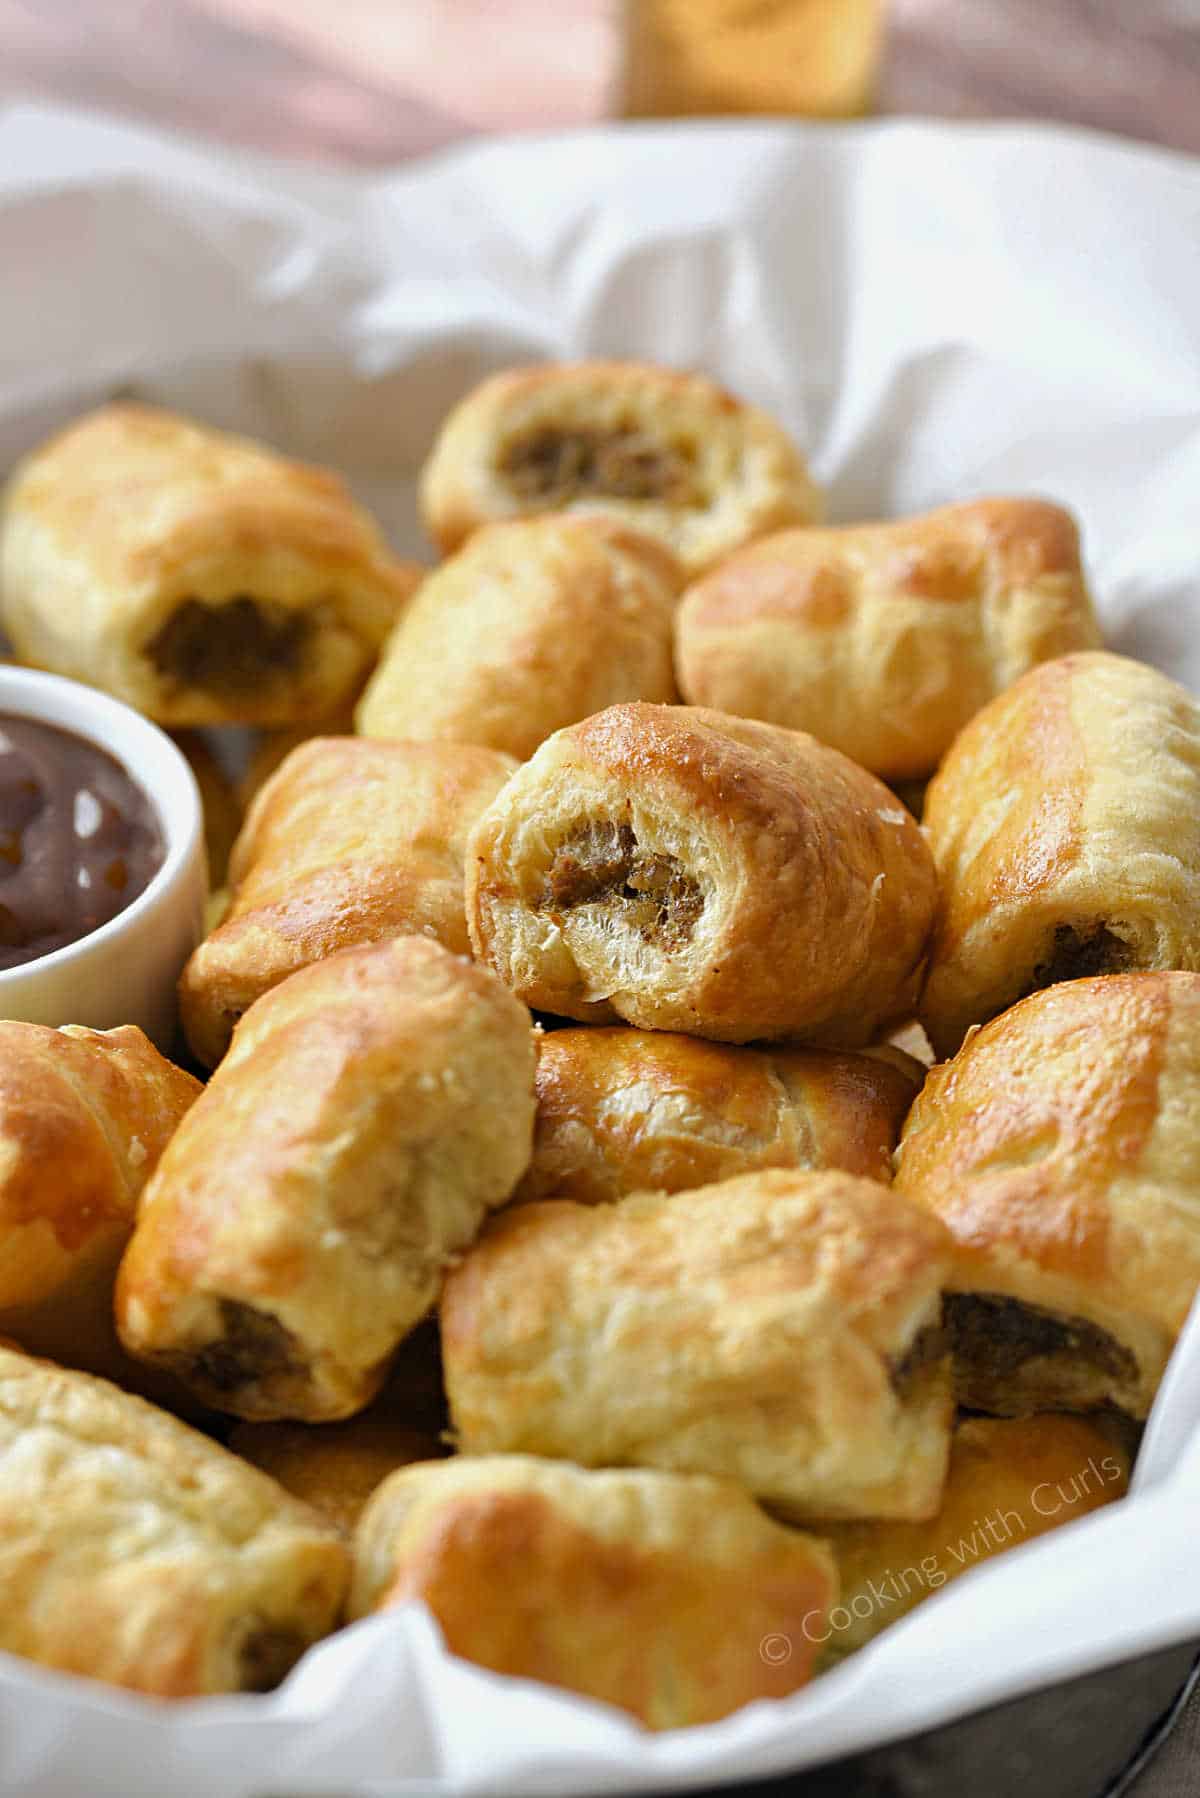 Puff pastry sausage rolls piled up in a serving basket with a side of dipping sauce.